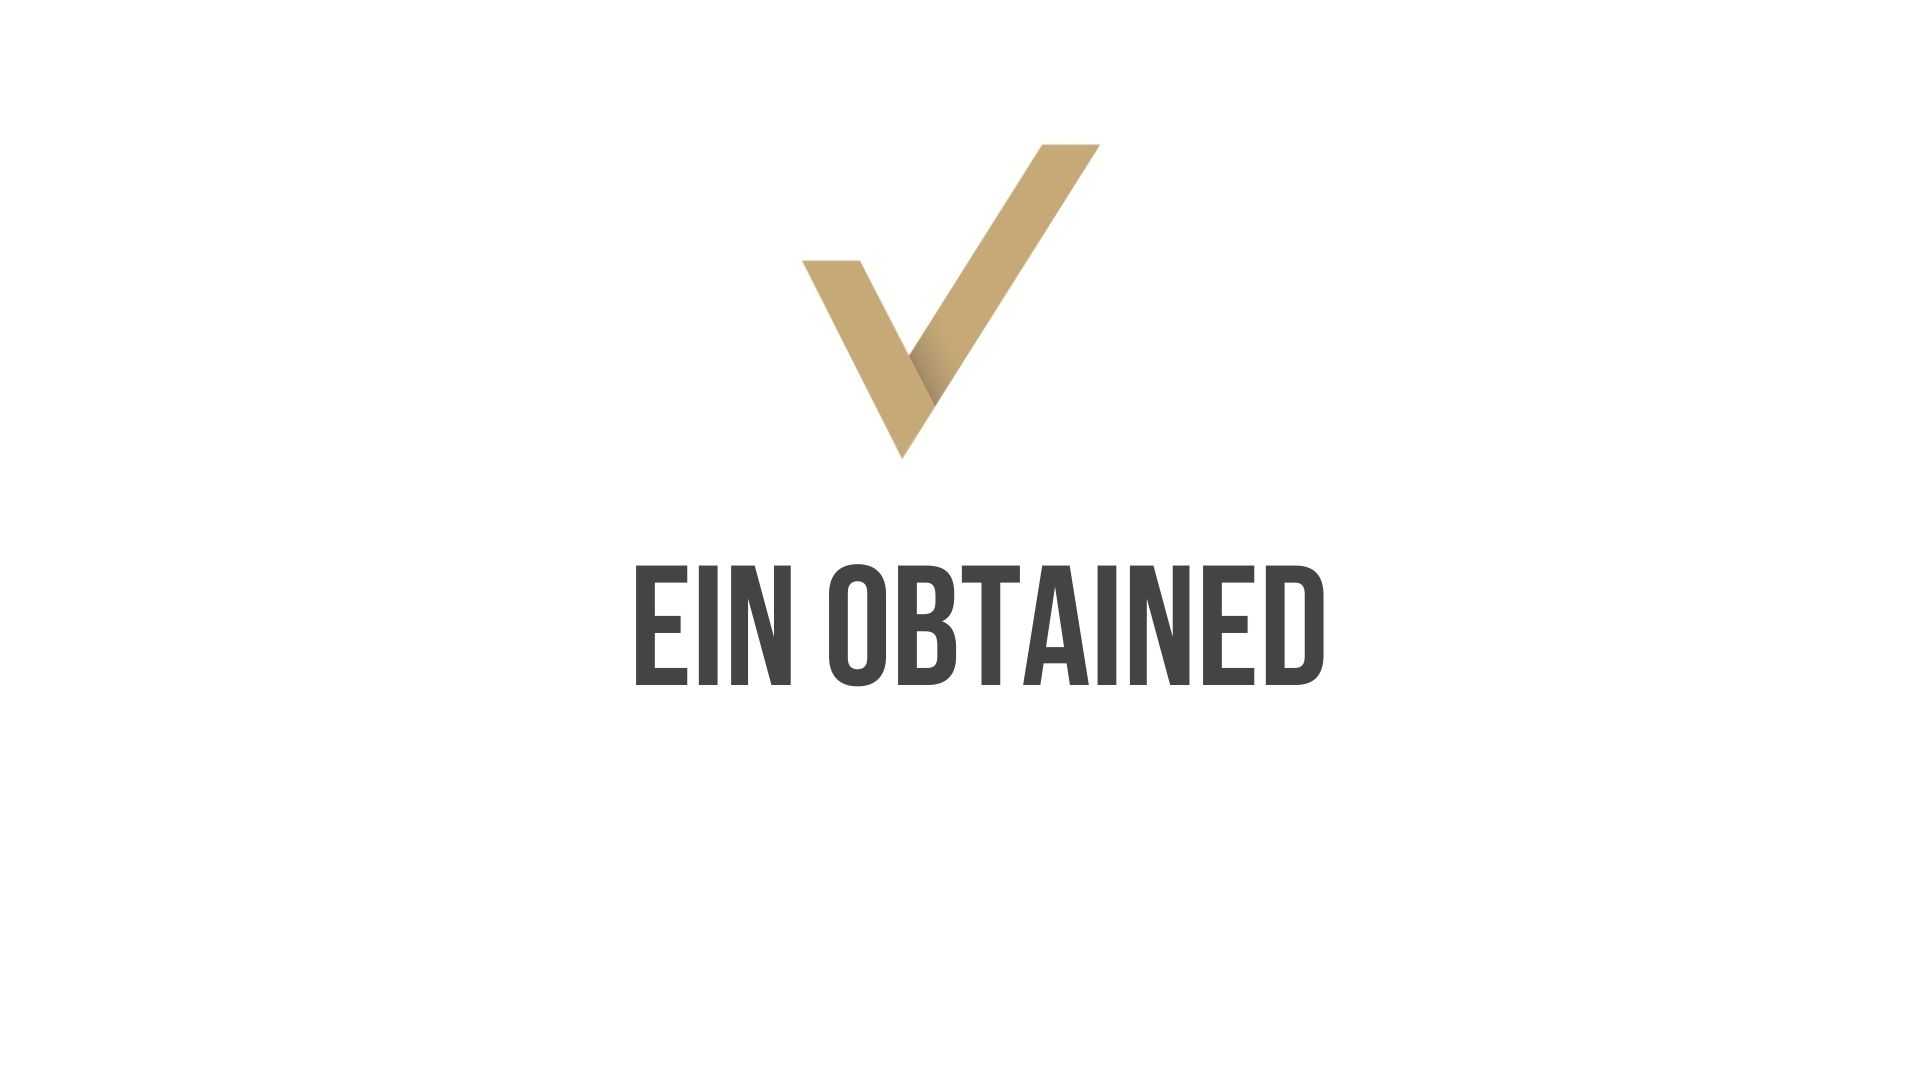 EIN Obtained for Business Started by F-1 Student on OPT